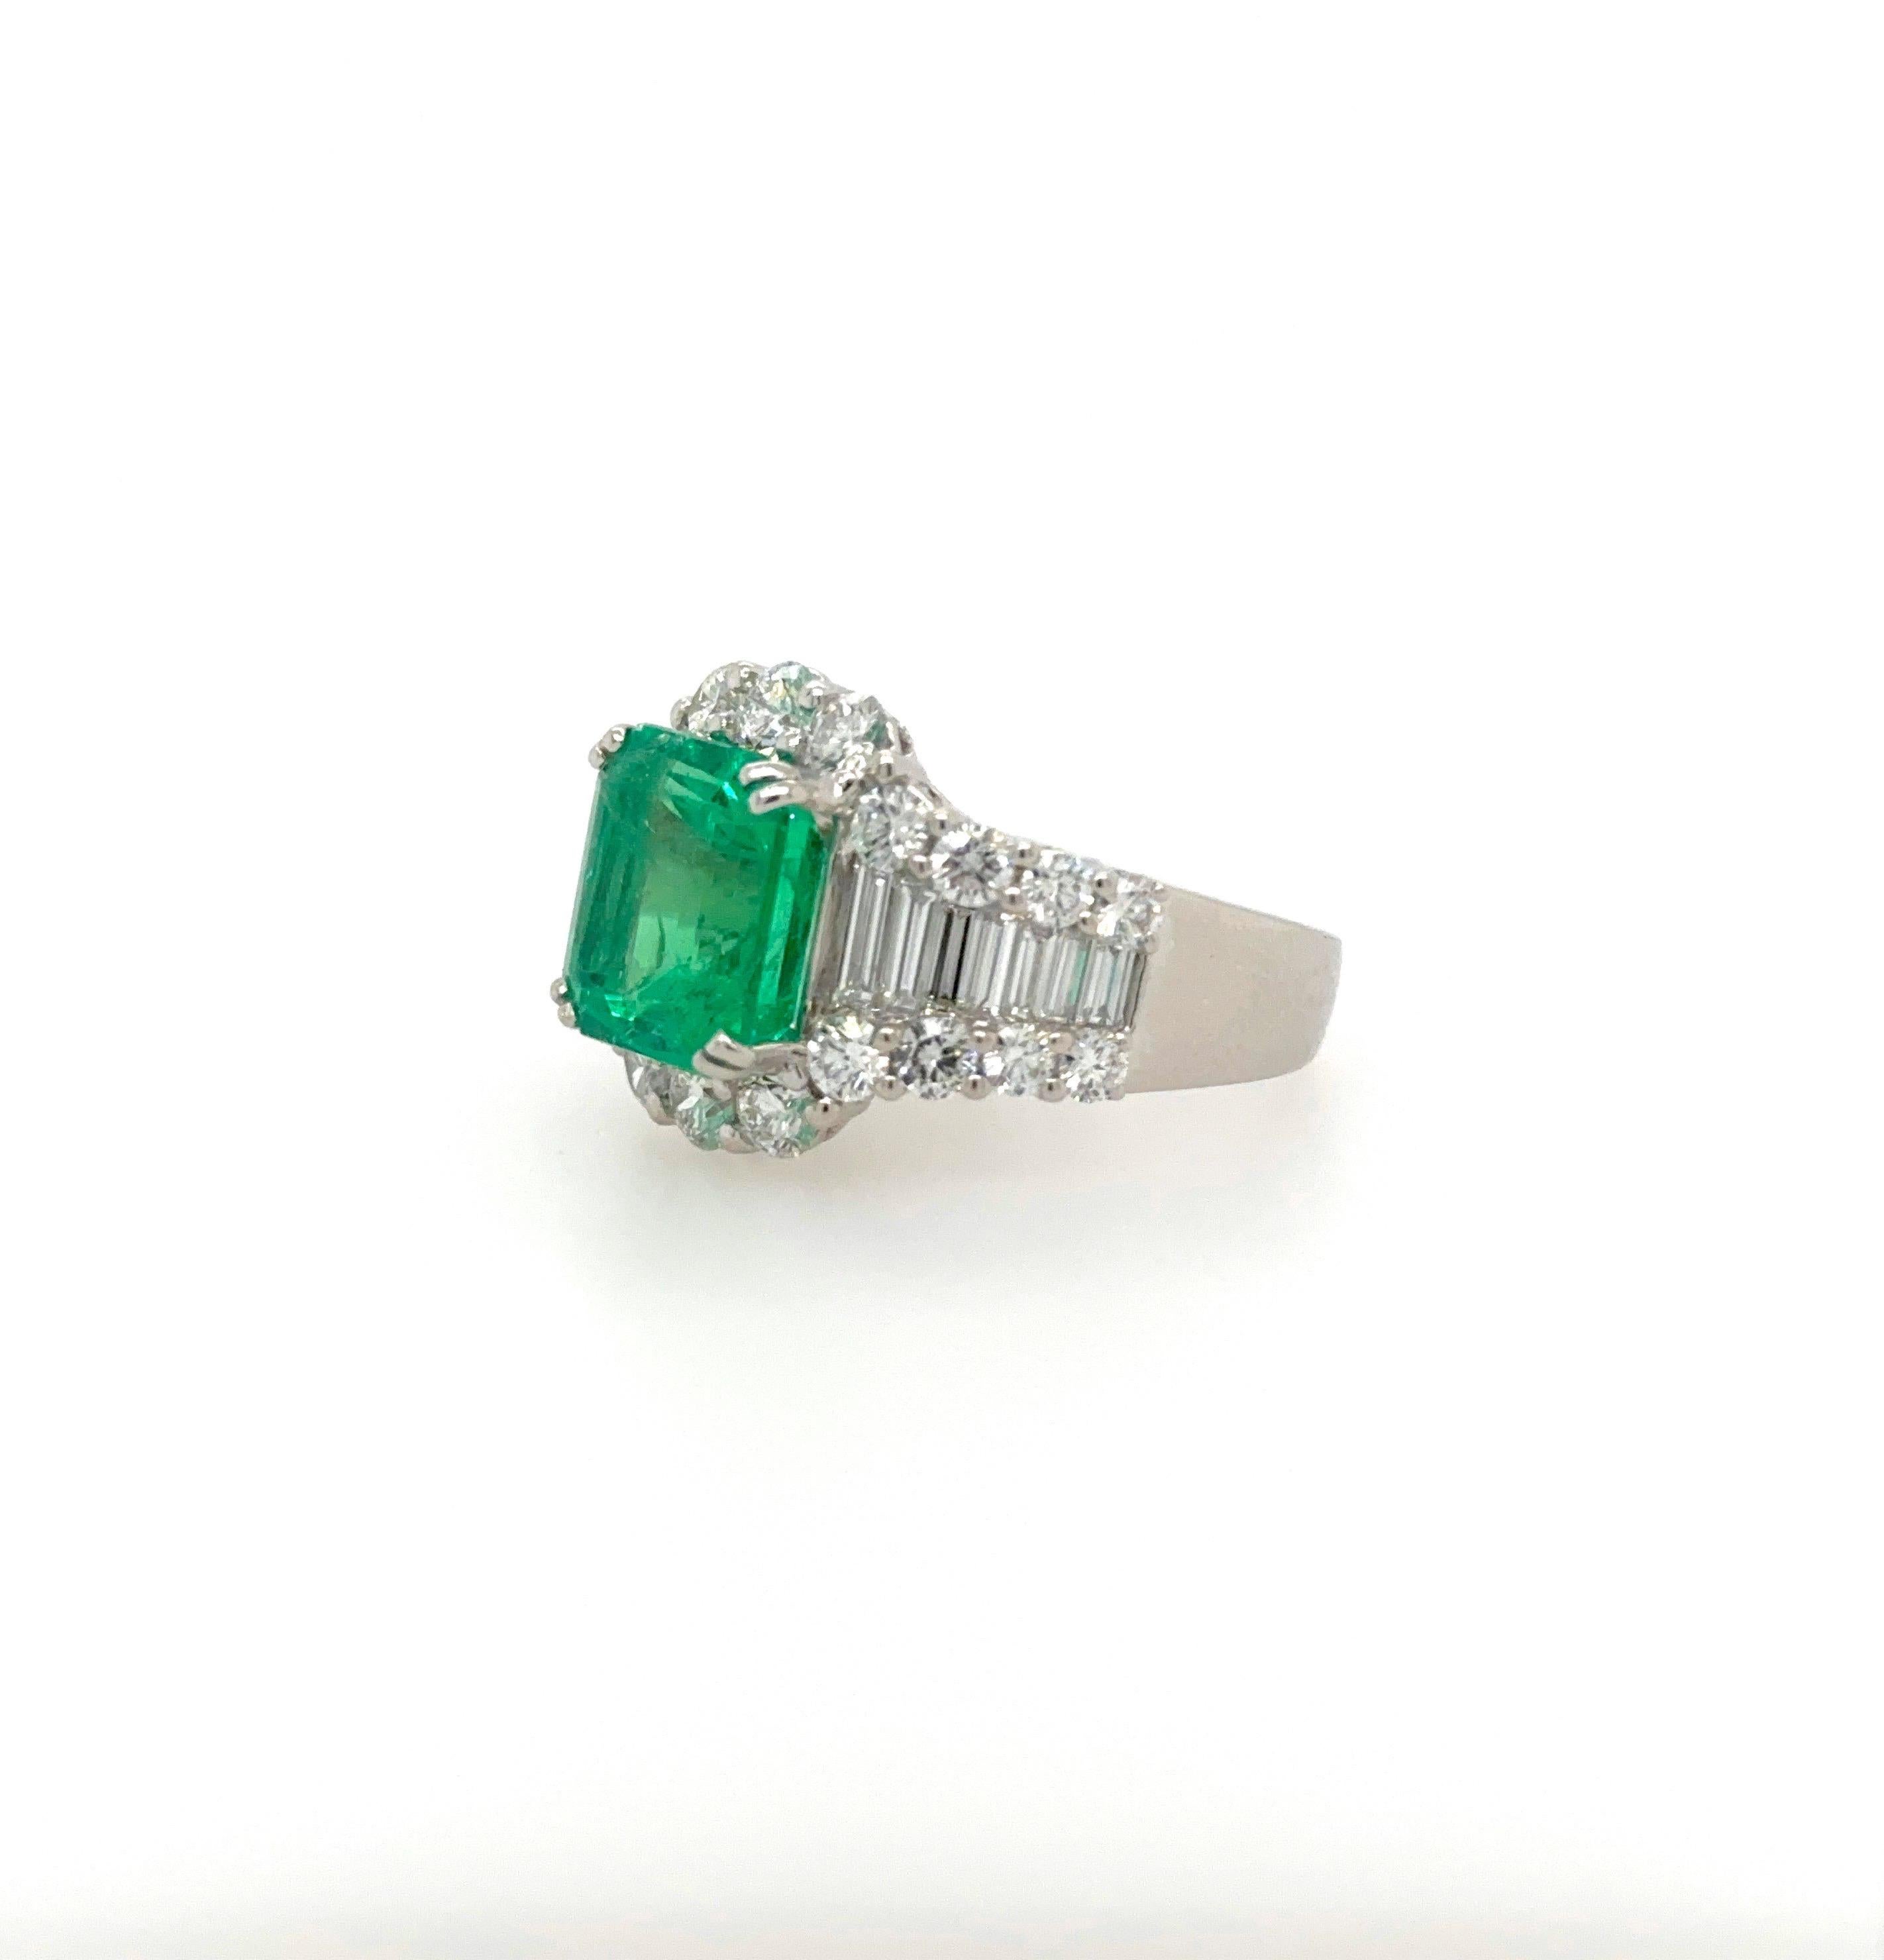 This impressive ring features a beautiful vivid green Colombian emerald weighing 5.37 carat and accompanied with a GIA certificate stating the origin as Colombia.
Total diamond weight is approximately 3.3 carats.
Round diamonds approximately 2.2